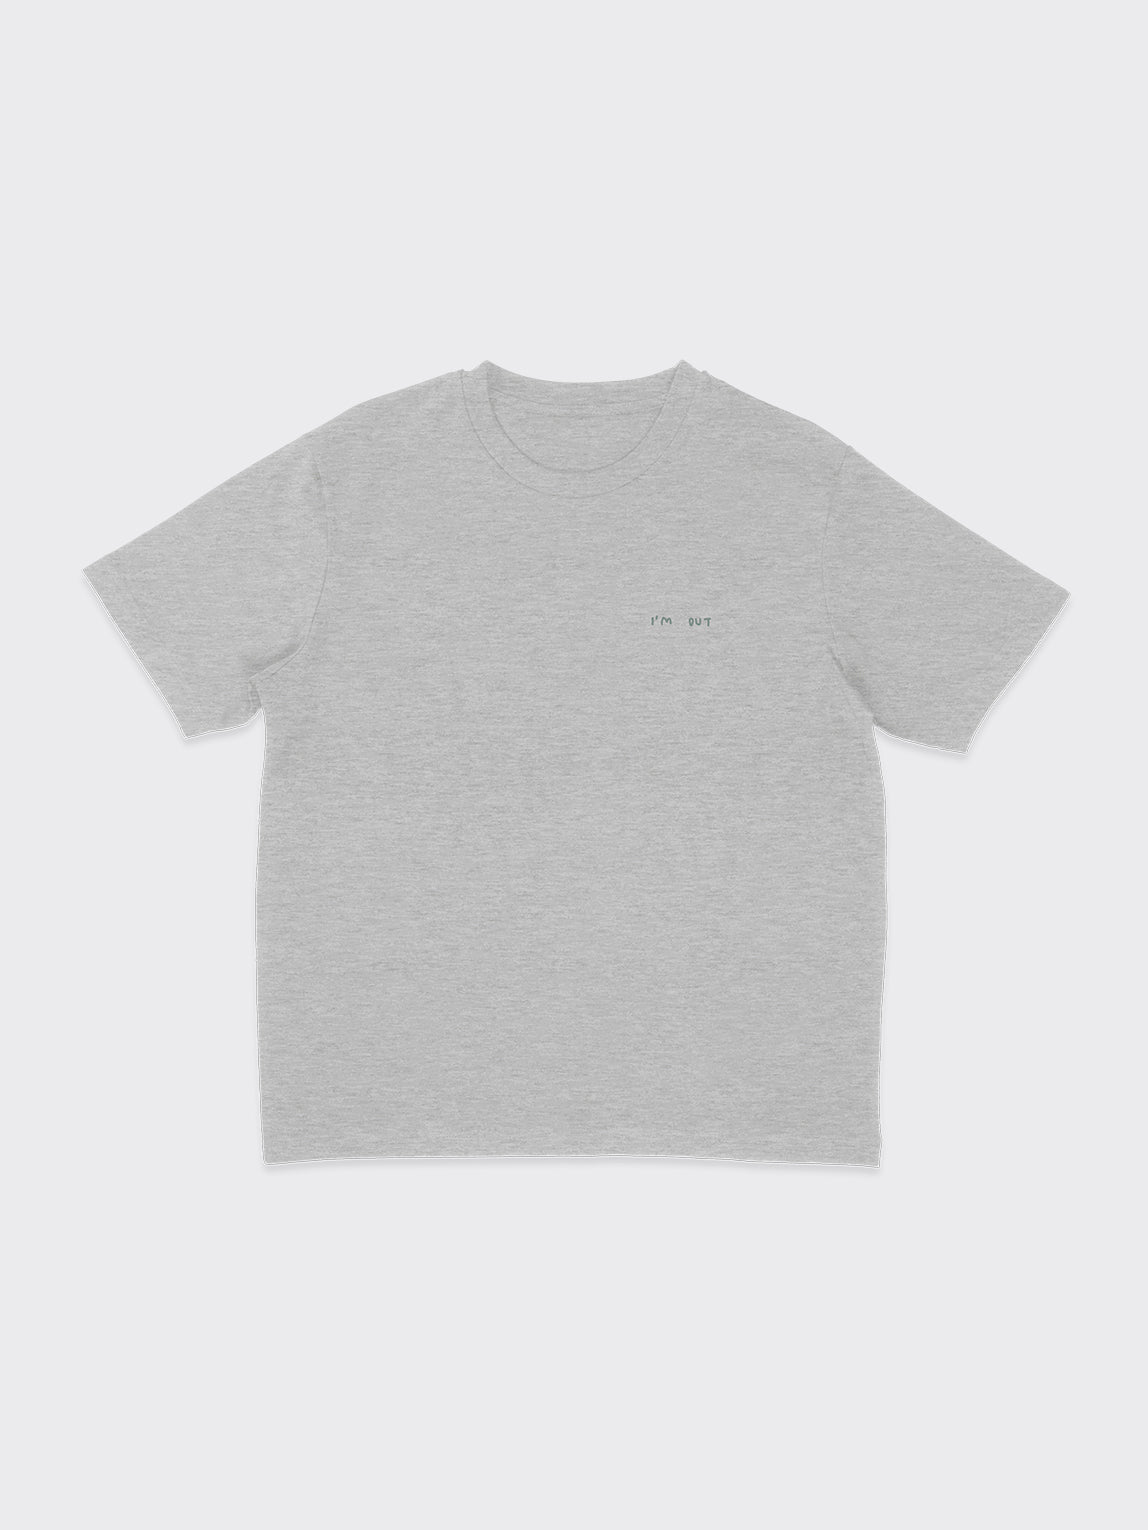 I'm out - heather grey version